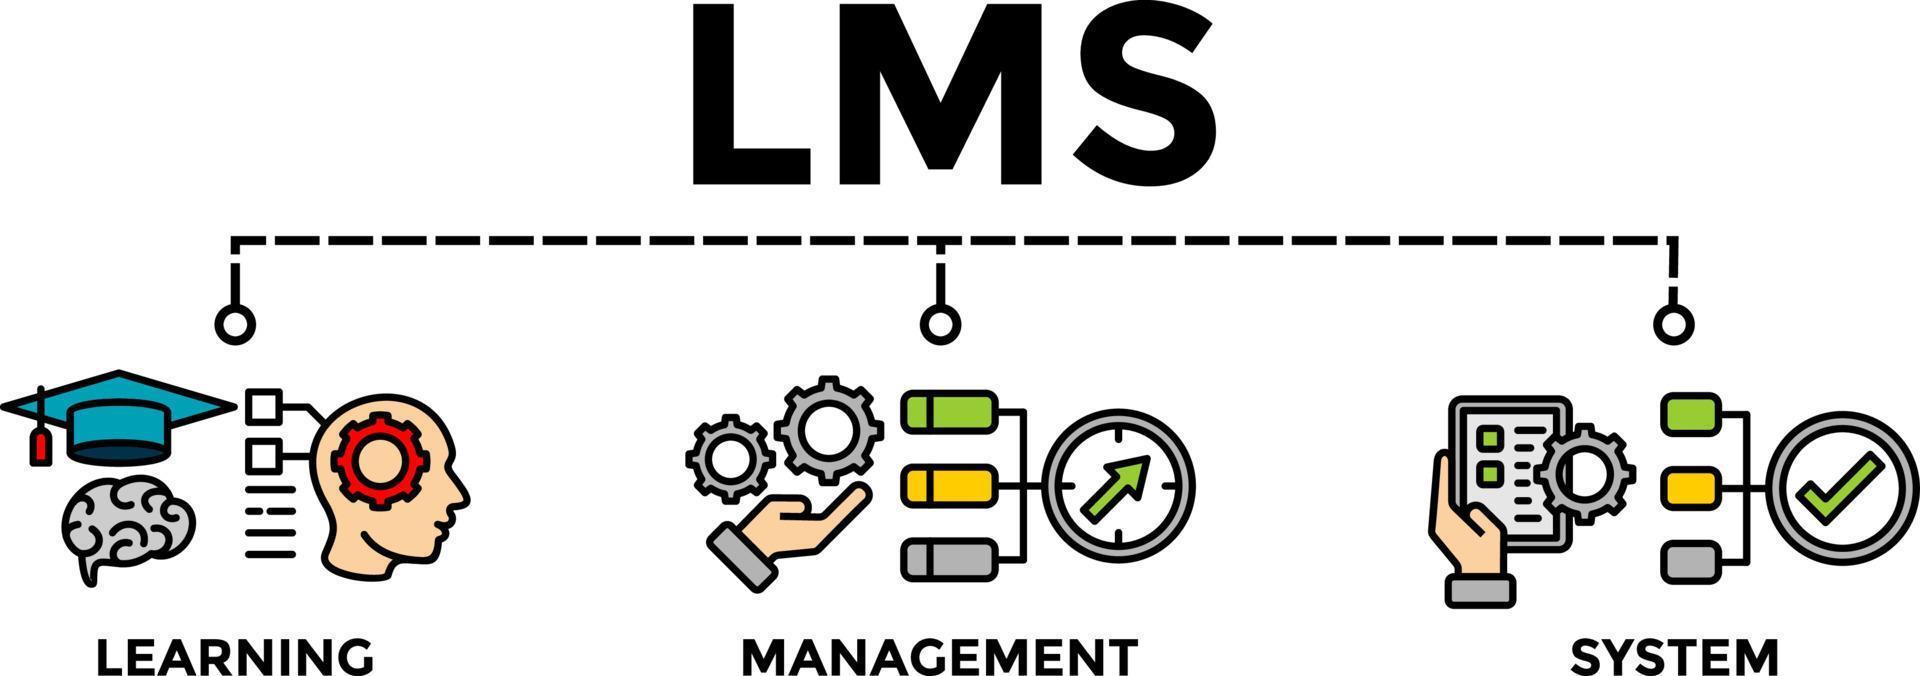 LMS - Learning Management System. LMS Banner Web Vector Illustration Concept for with icons.